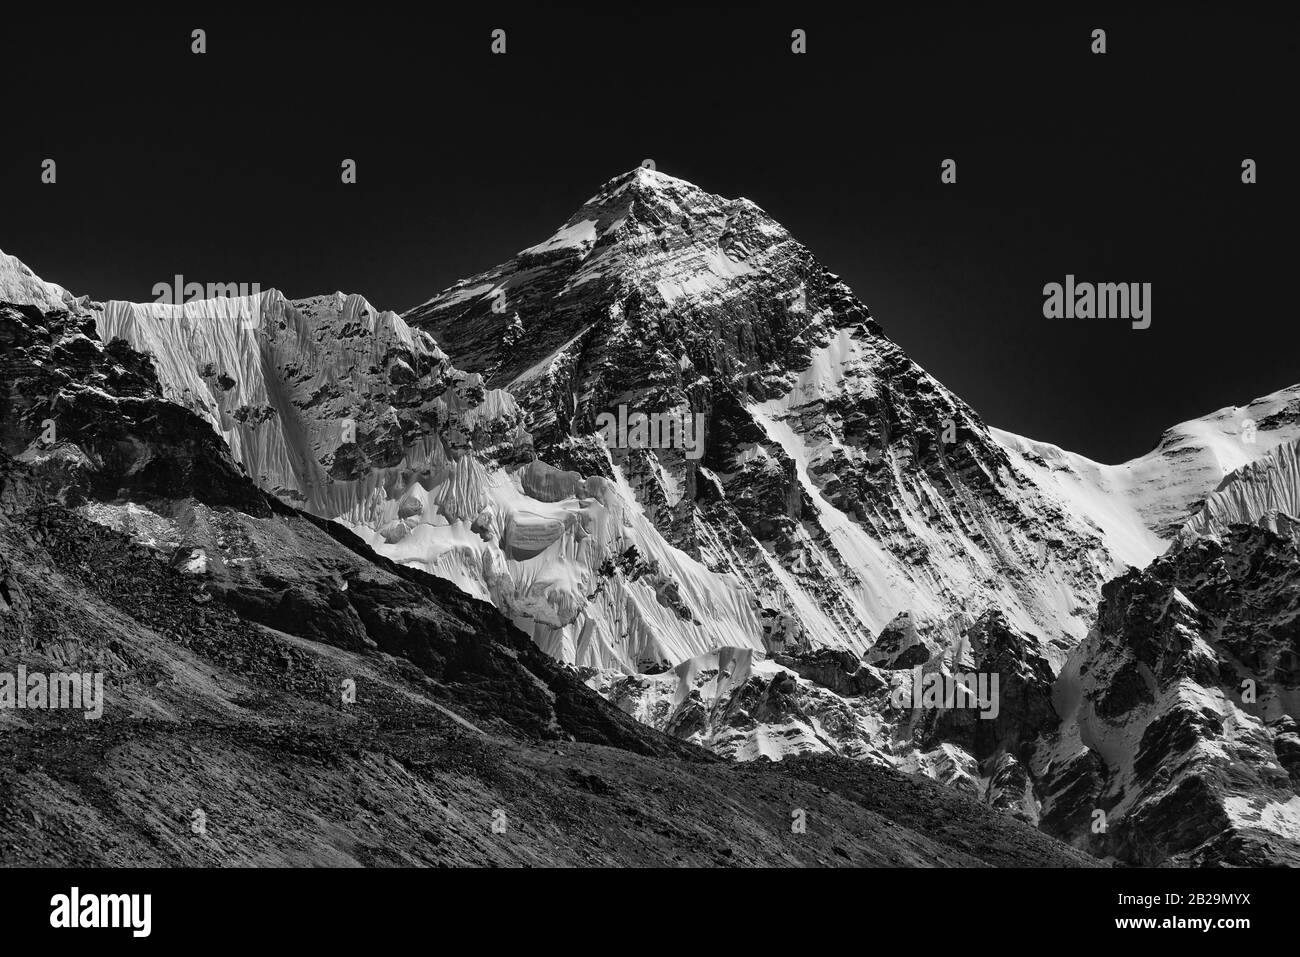 Mount Everest, the highest mountain in the world, of Himalayas in Nepal (black and white) Stock Photo